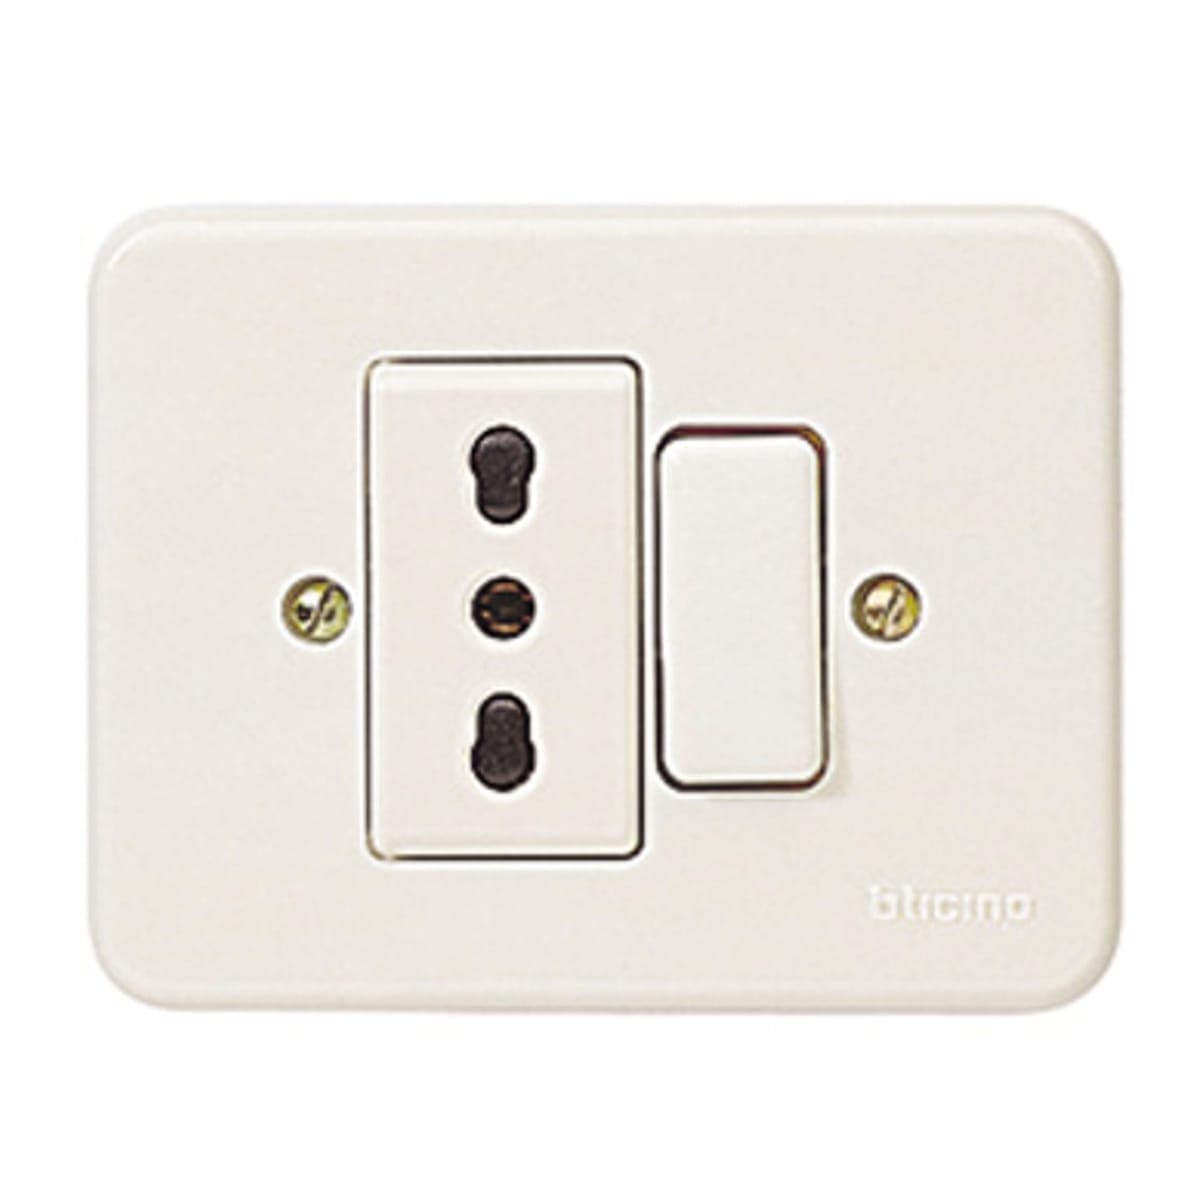 DOMINO 2-SEATER MONOBLOC PLATE WITH DIVERTER AND SOCKET